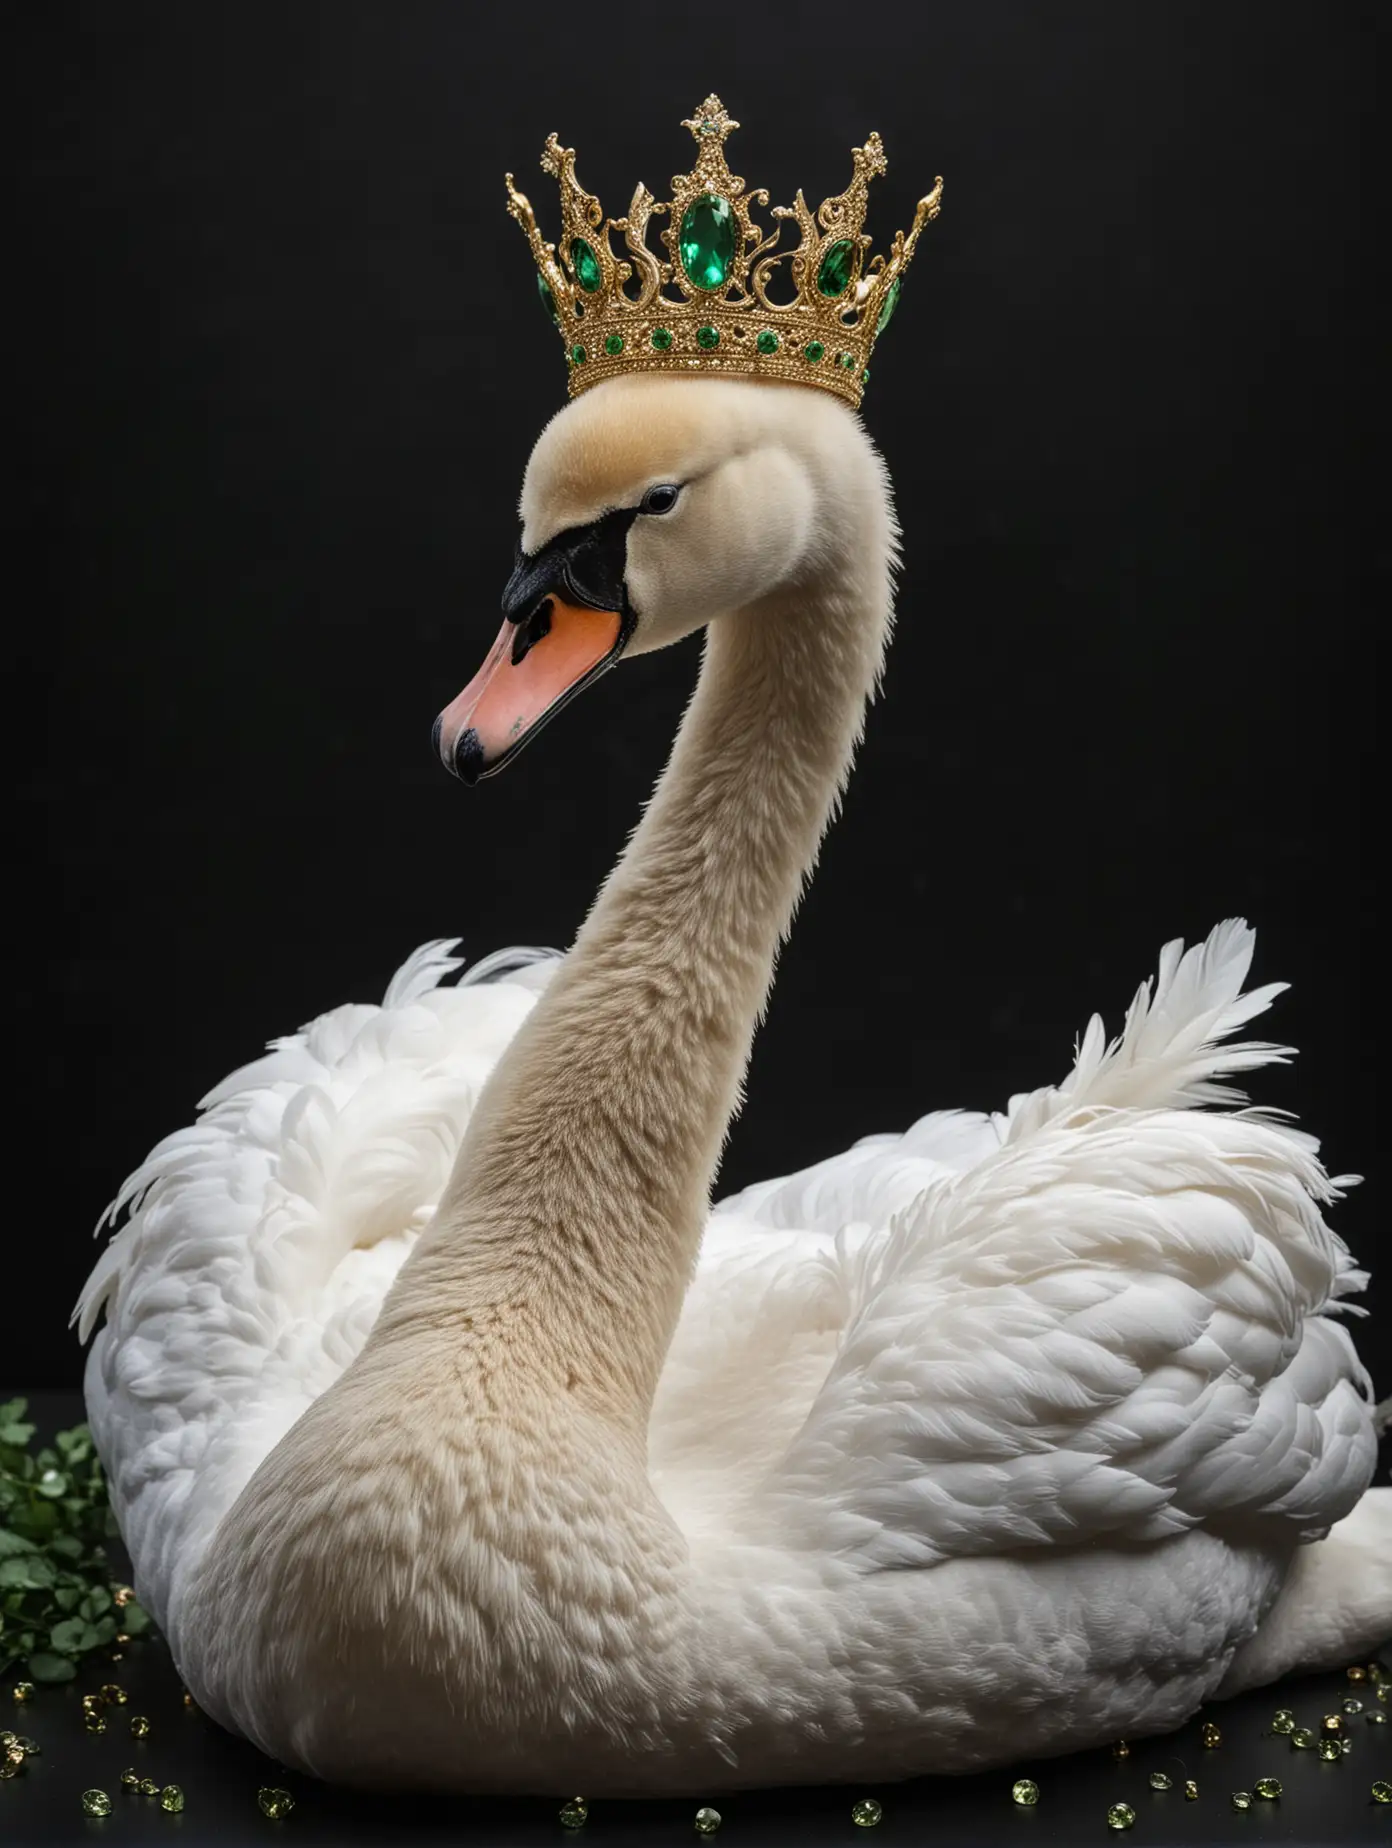 Elegant-White-Swan-with-Gold-Crown-and-Green-Jewels-on-Black-Background